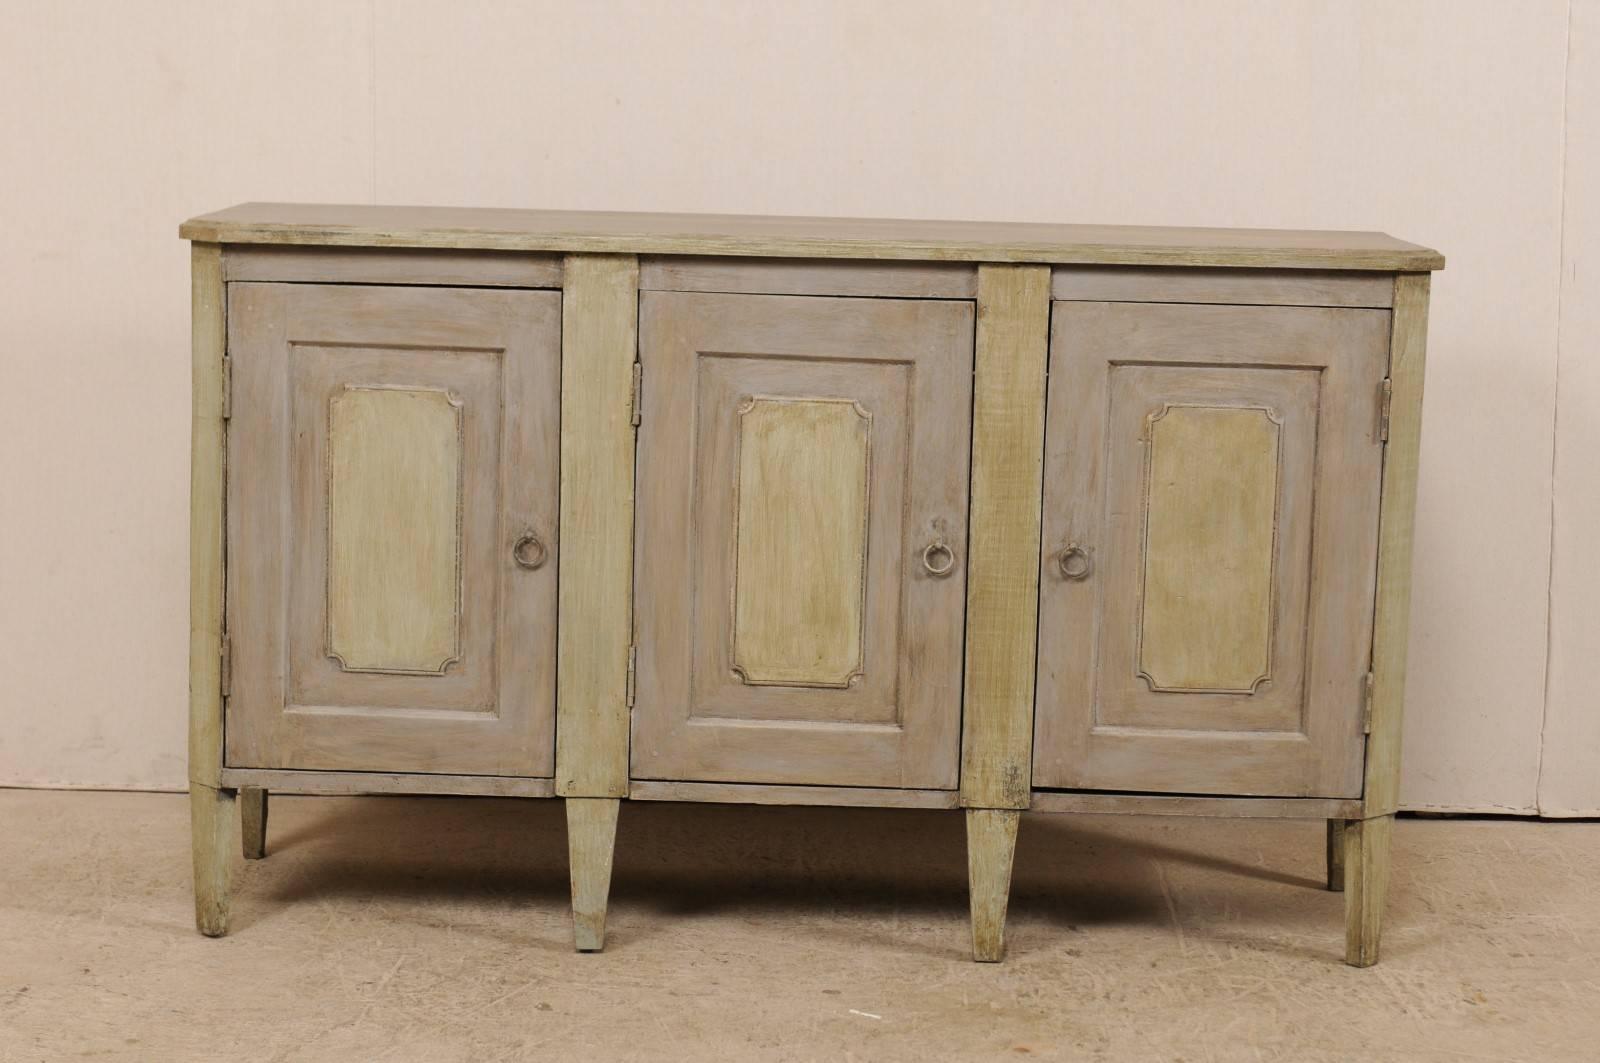 A vintage American painted wood buffet sideboard cabinet. This American cabinet is simplistically designed with nice, clean lines. It features three recessed paneled doors with accentuated centers, set within a case that has canted side posts, and a